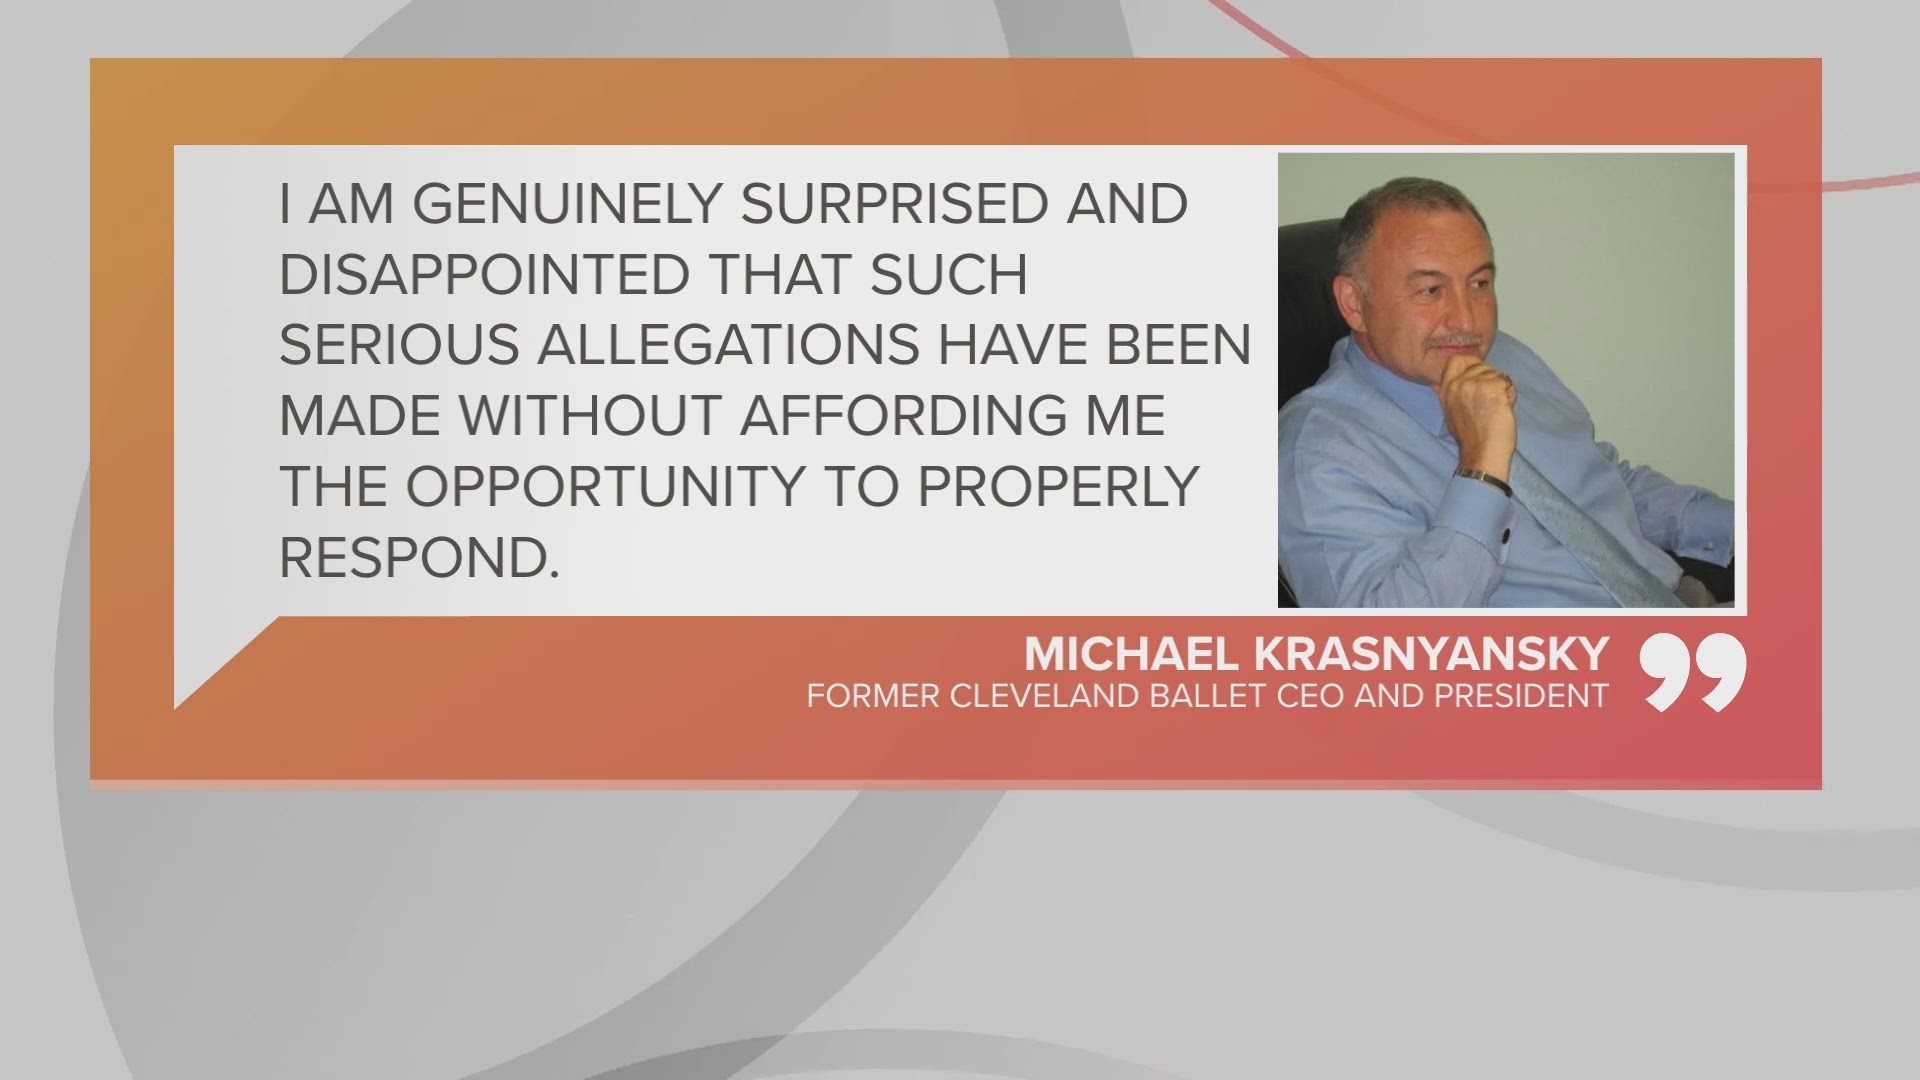 Krasnyansky resigned from Cleveland Ballet on Nov. 22, 2023, after being asked to step down over claims he was "sexually harassing dancers."